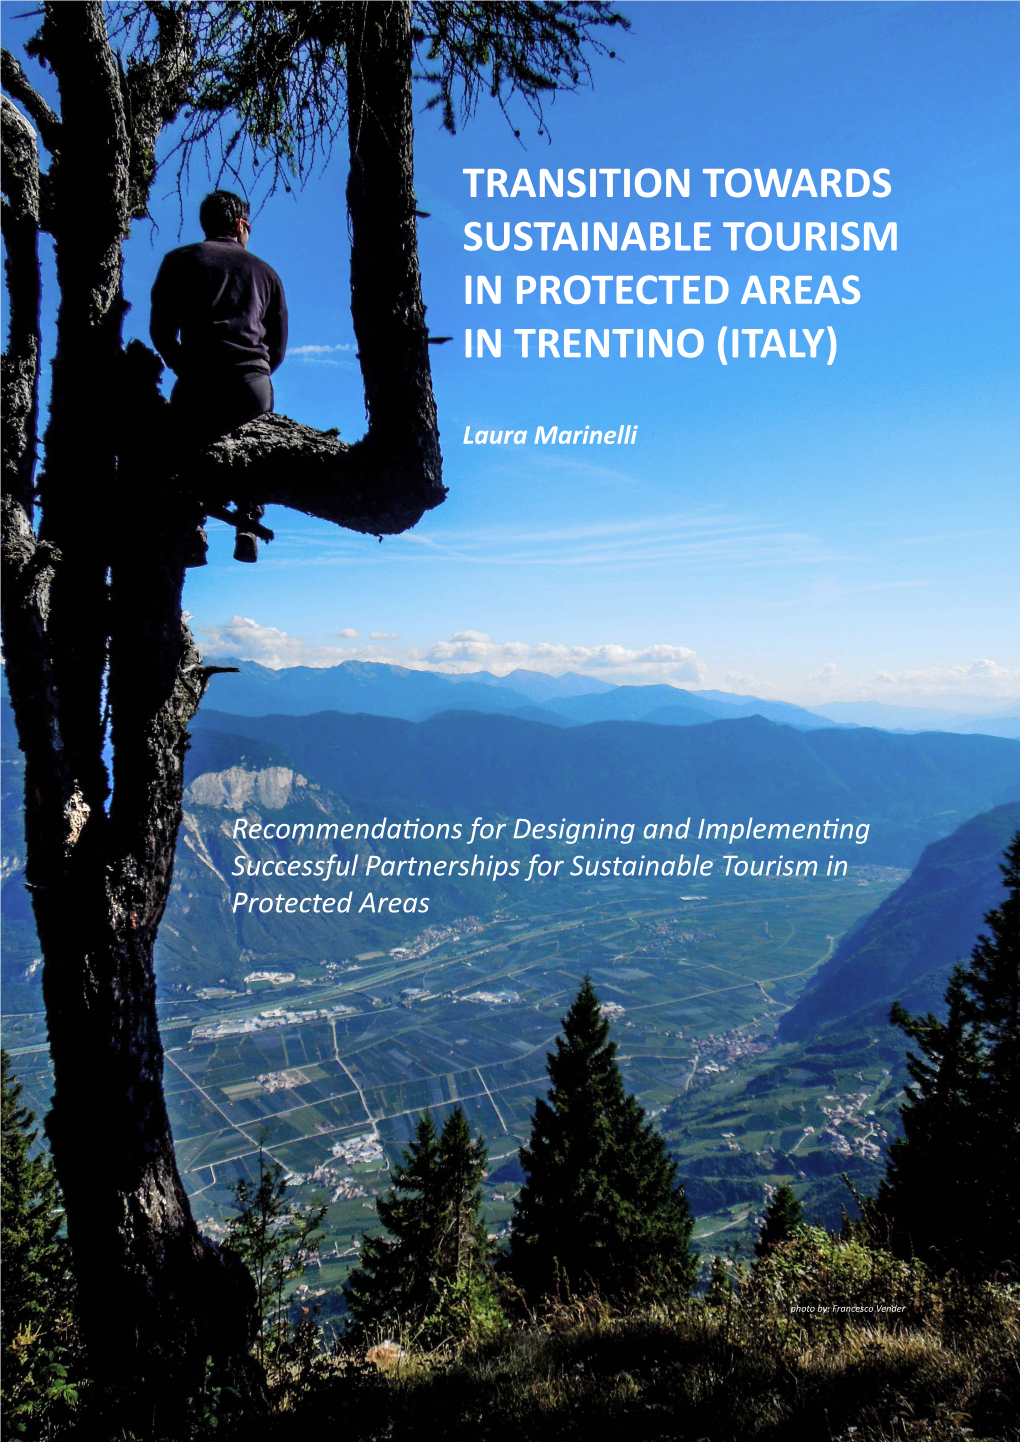 Transition Towards Sustainable Tourism in Protected Areas in Trentino (Italy)